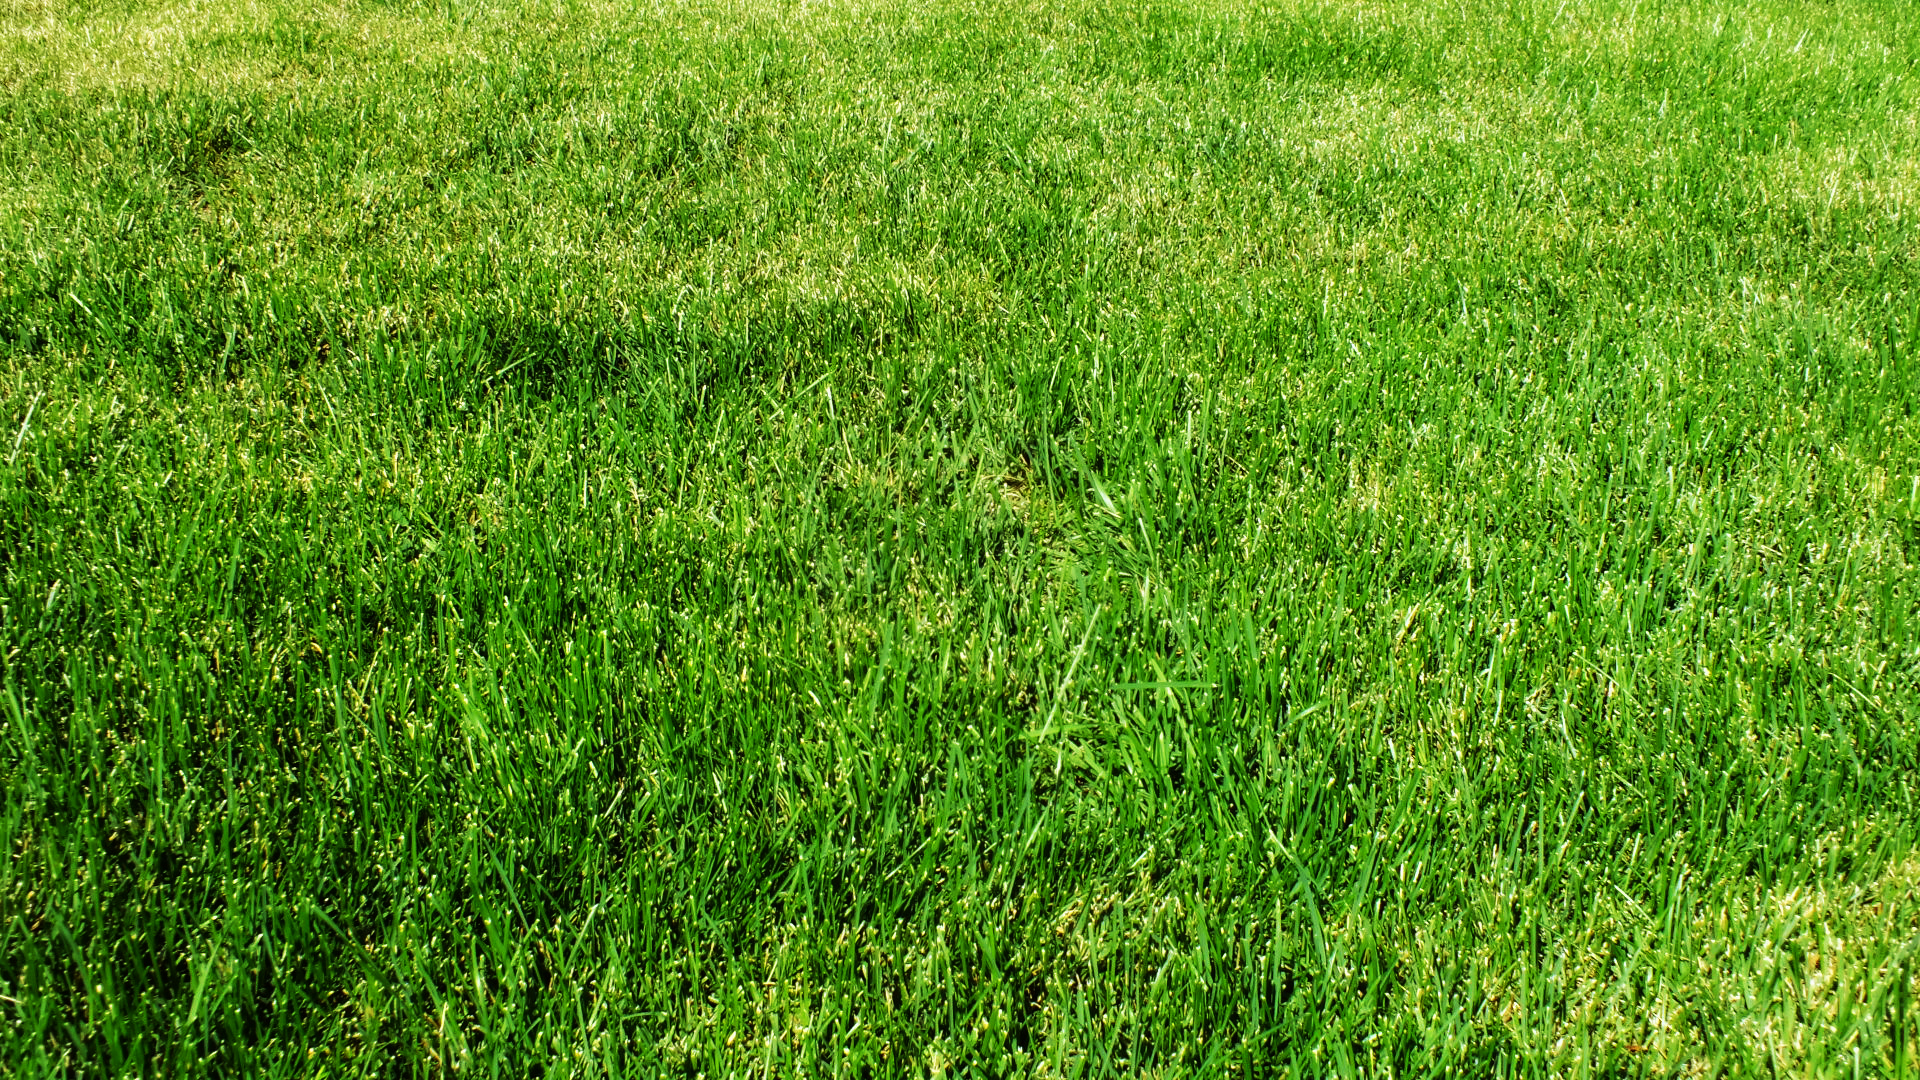 Artificial Grass Vs. A Lawn: Pros and Cons